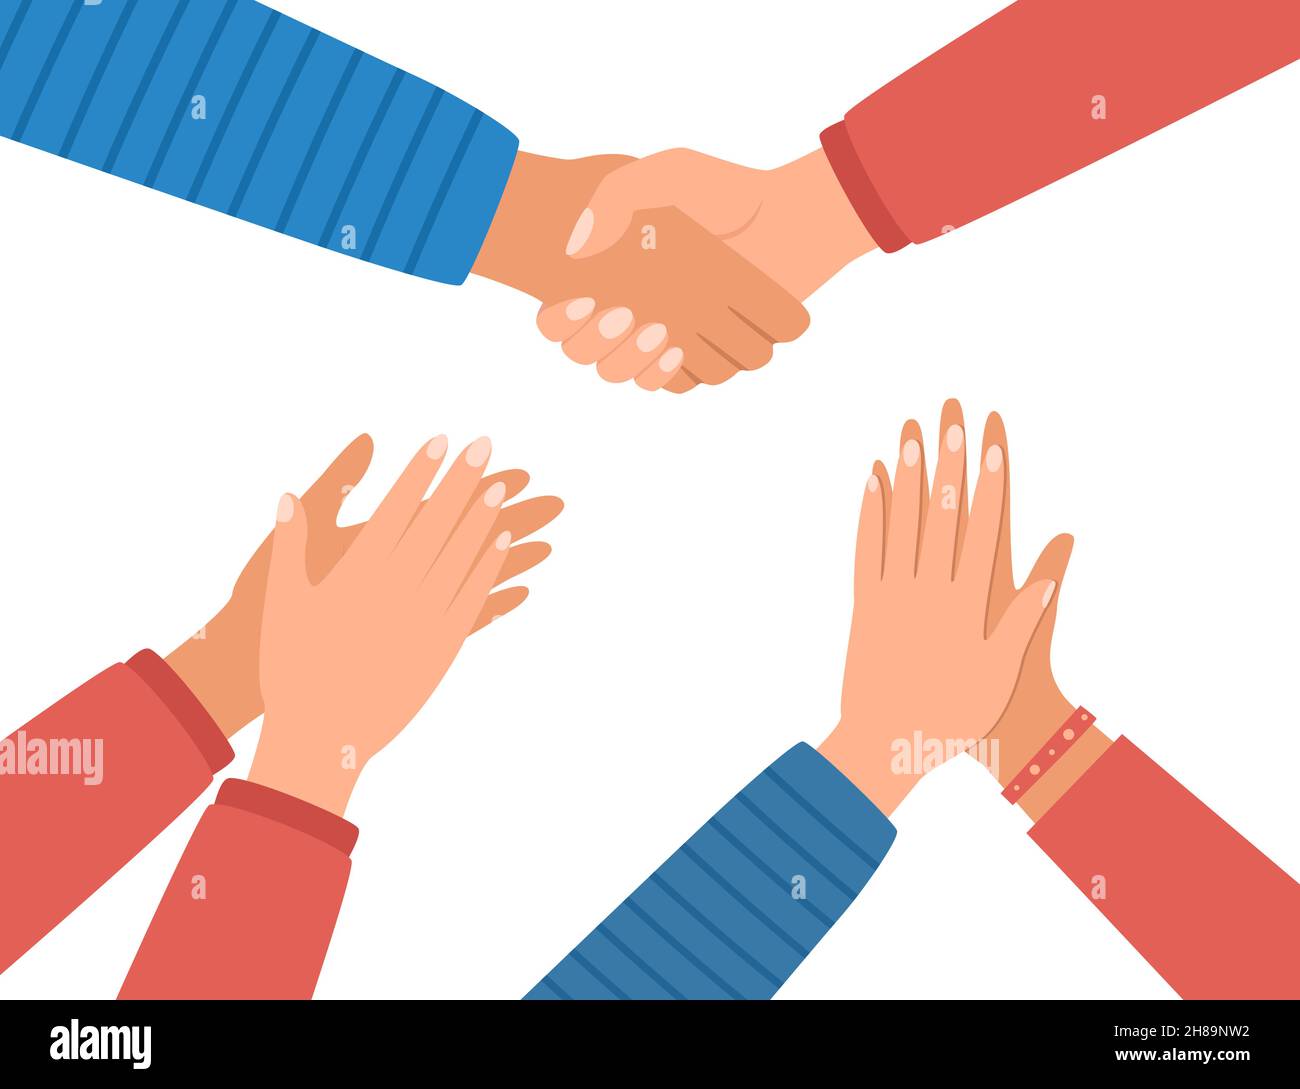 Shaking, clapping, applauding hands. Handshake. High five gesture. Symbol of success deal, partnership, greeting, teamwork, friendship unity helpsuppo Stock Vector